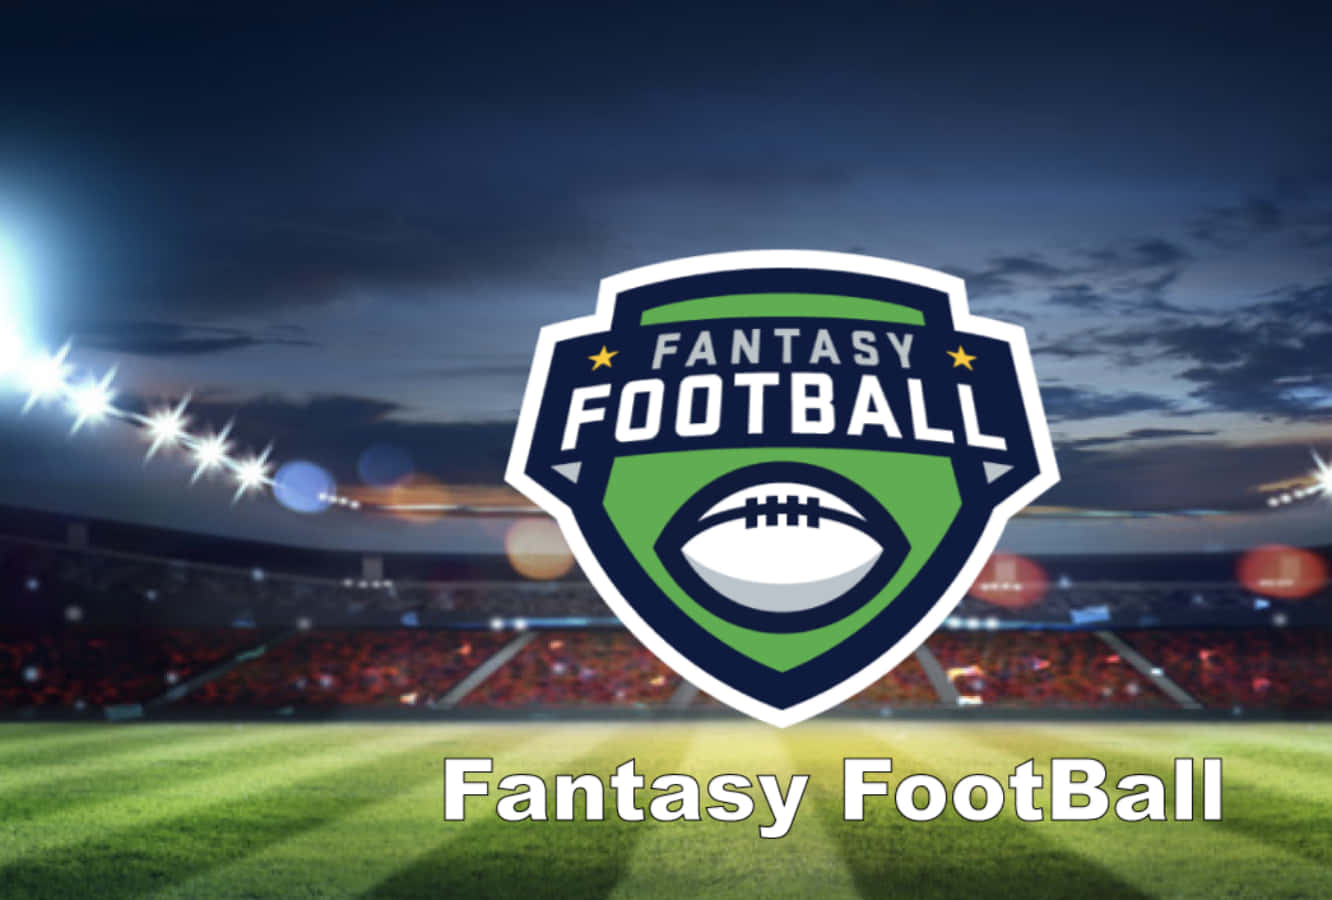 Celebrate fantasy football success with friends! Wallpaper